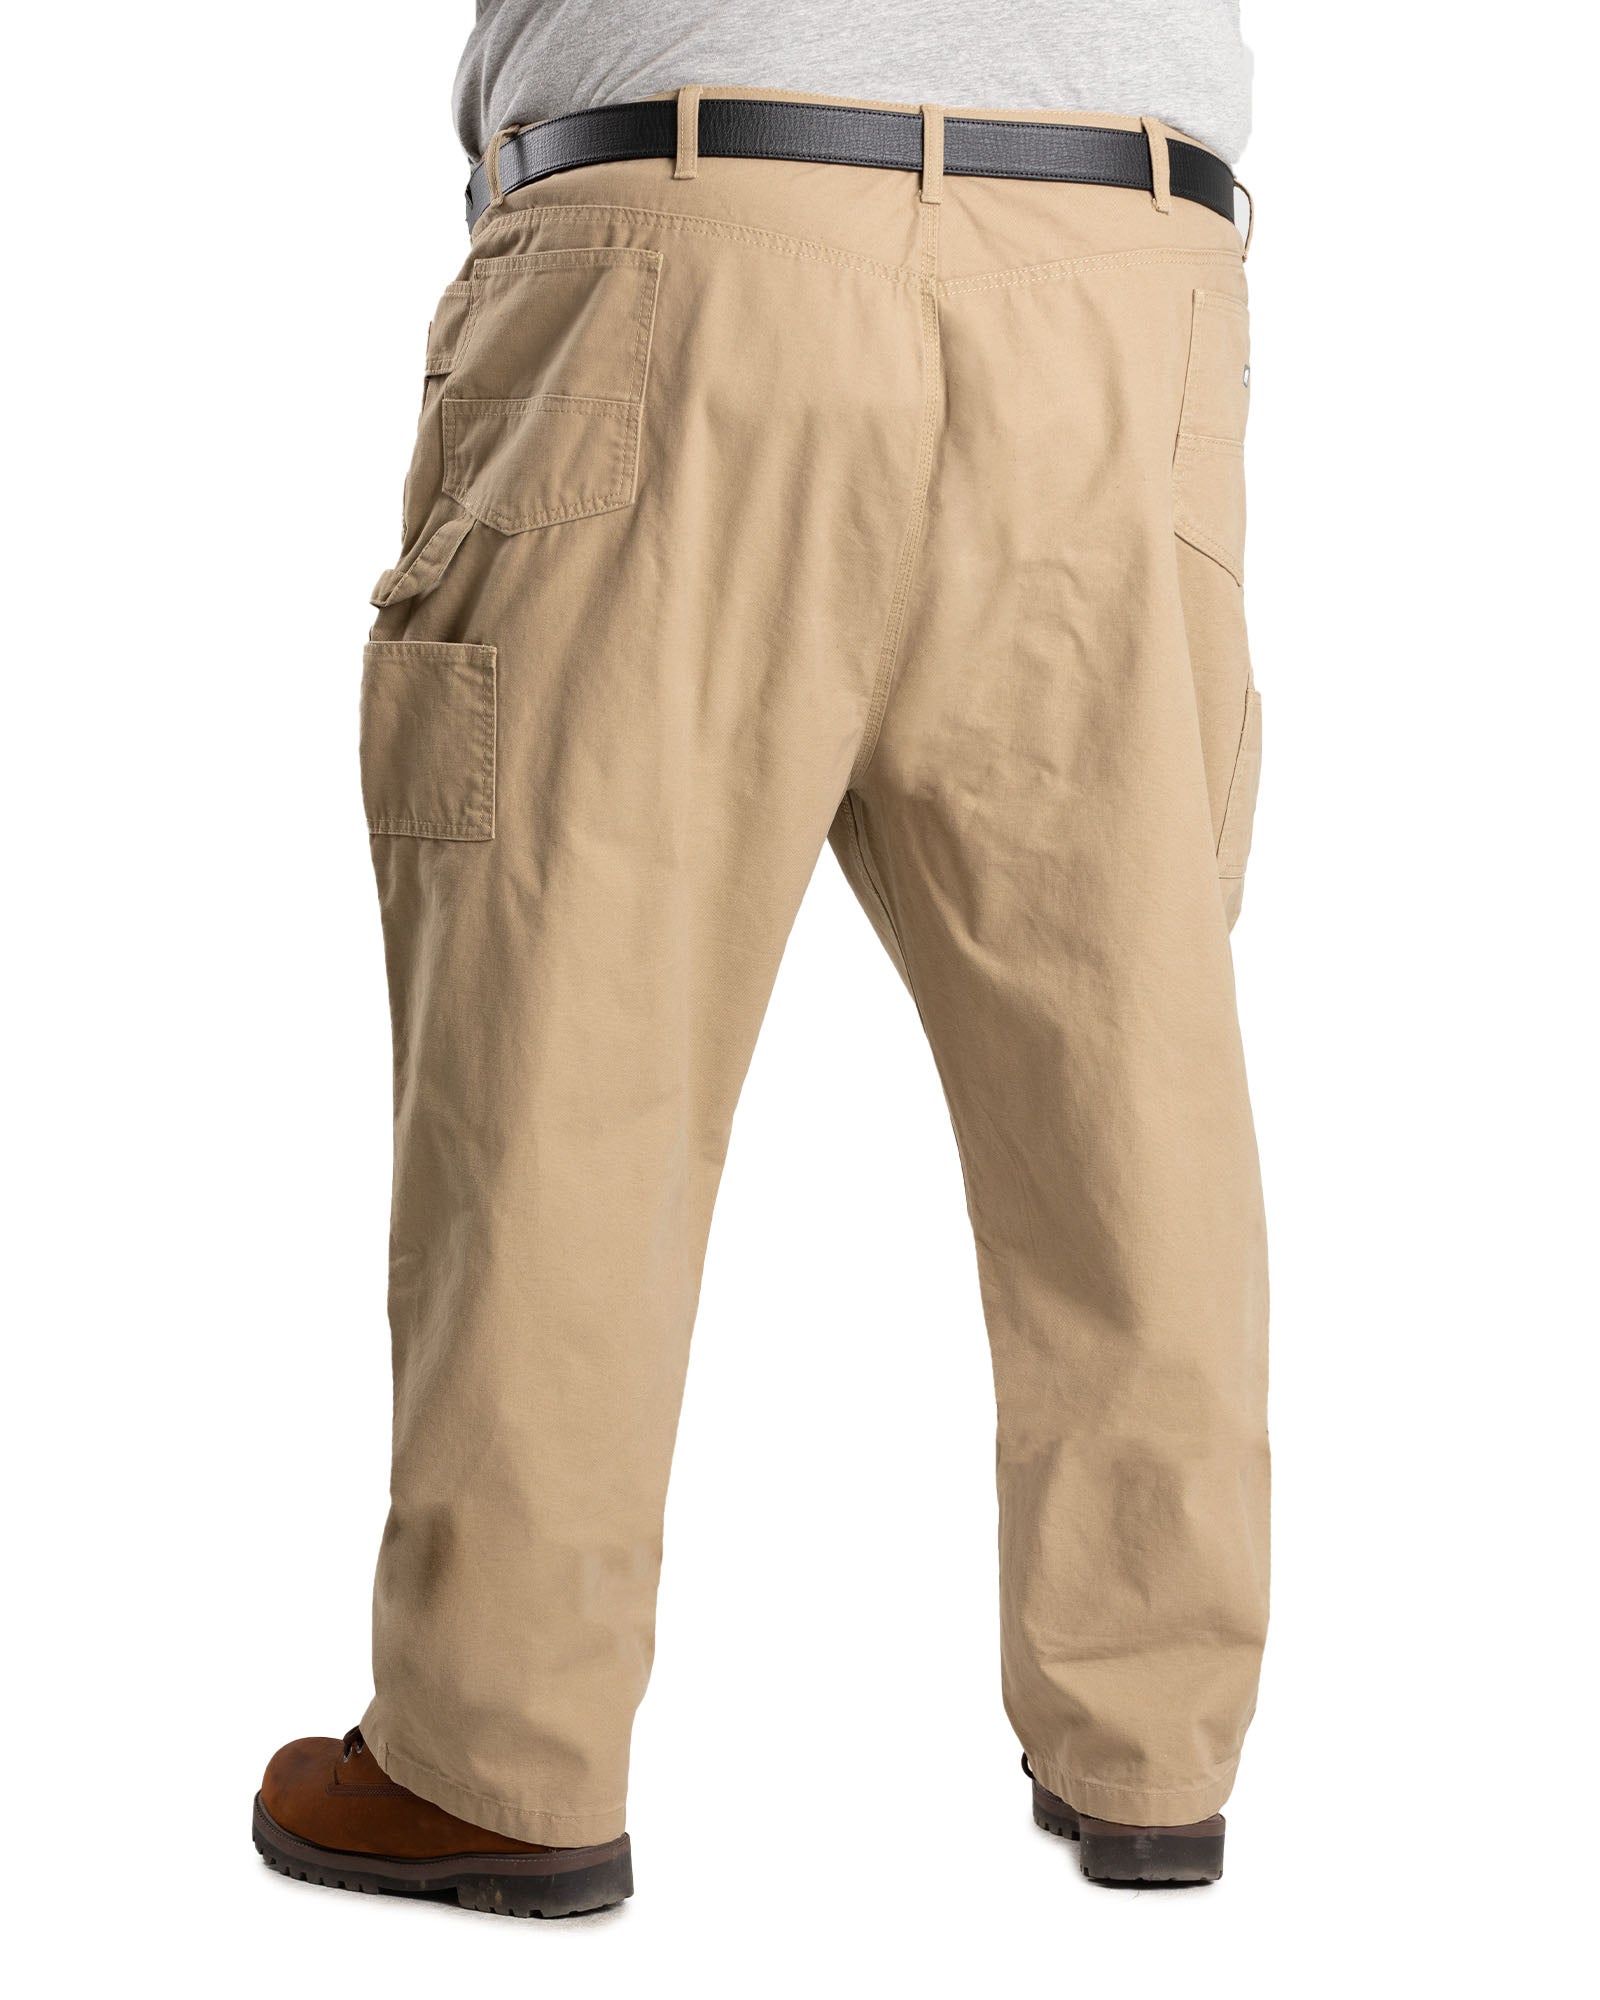 Heartland Washed Duck Relaxed Fit Carpenter Pant